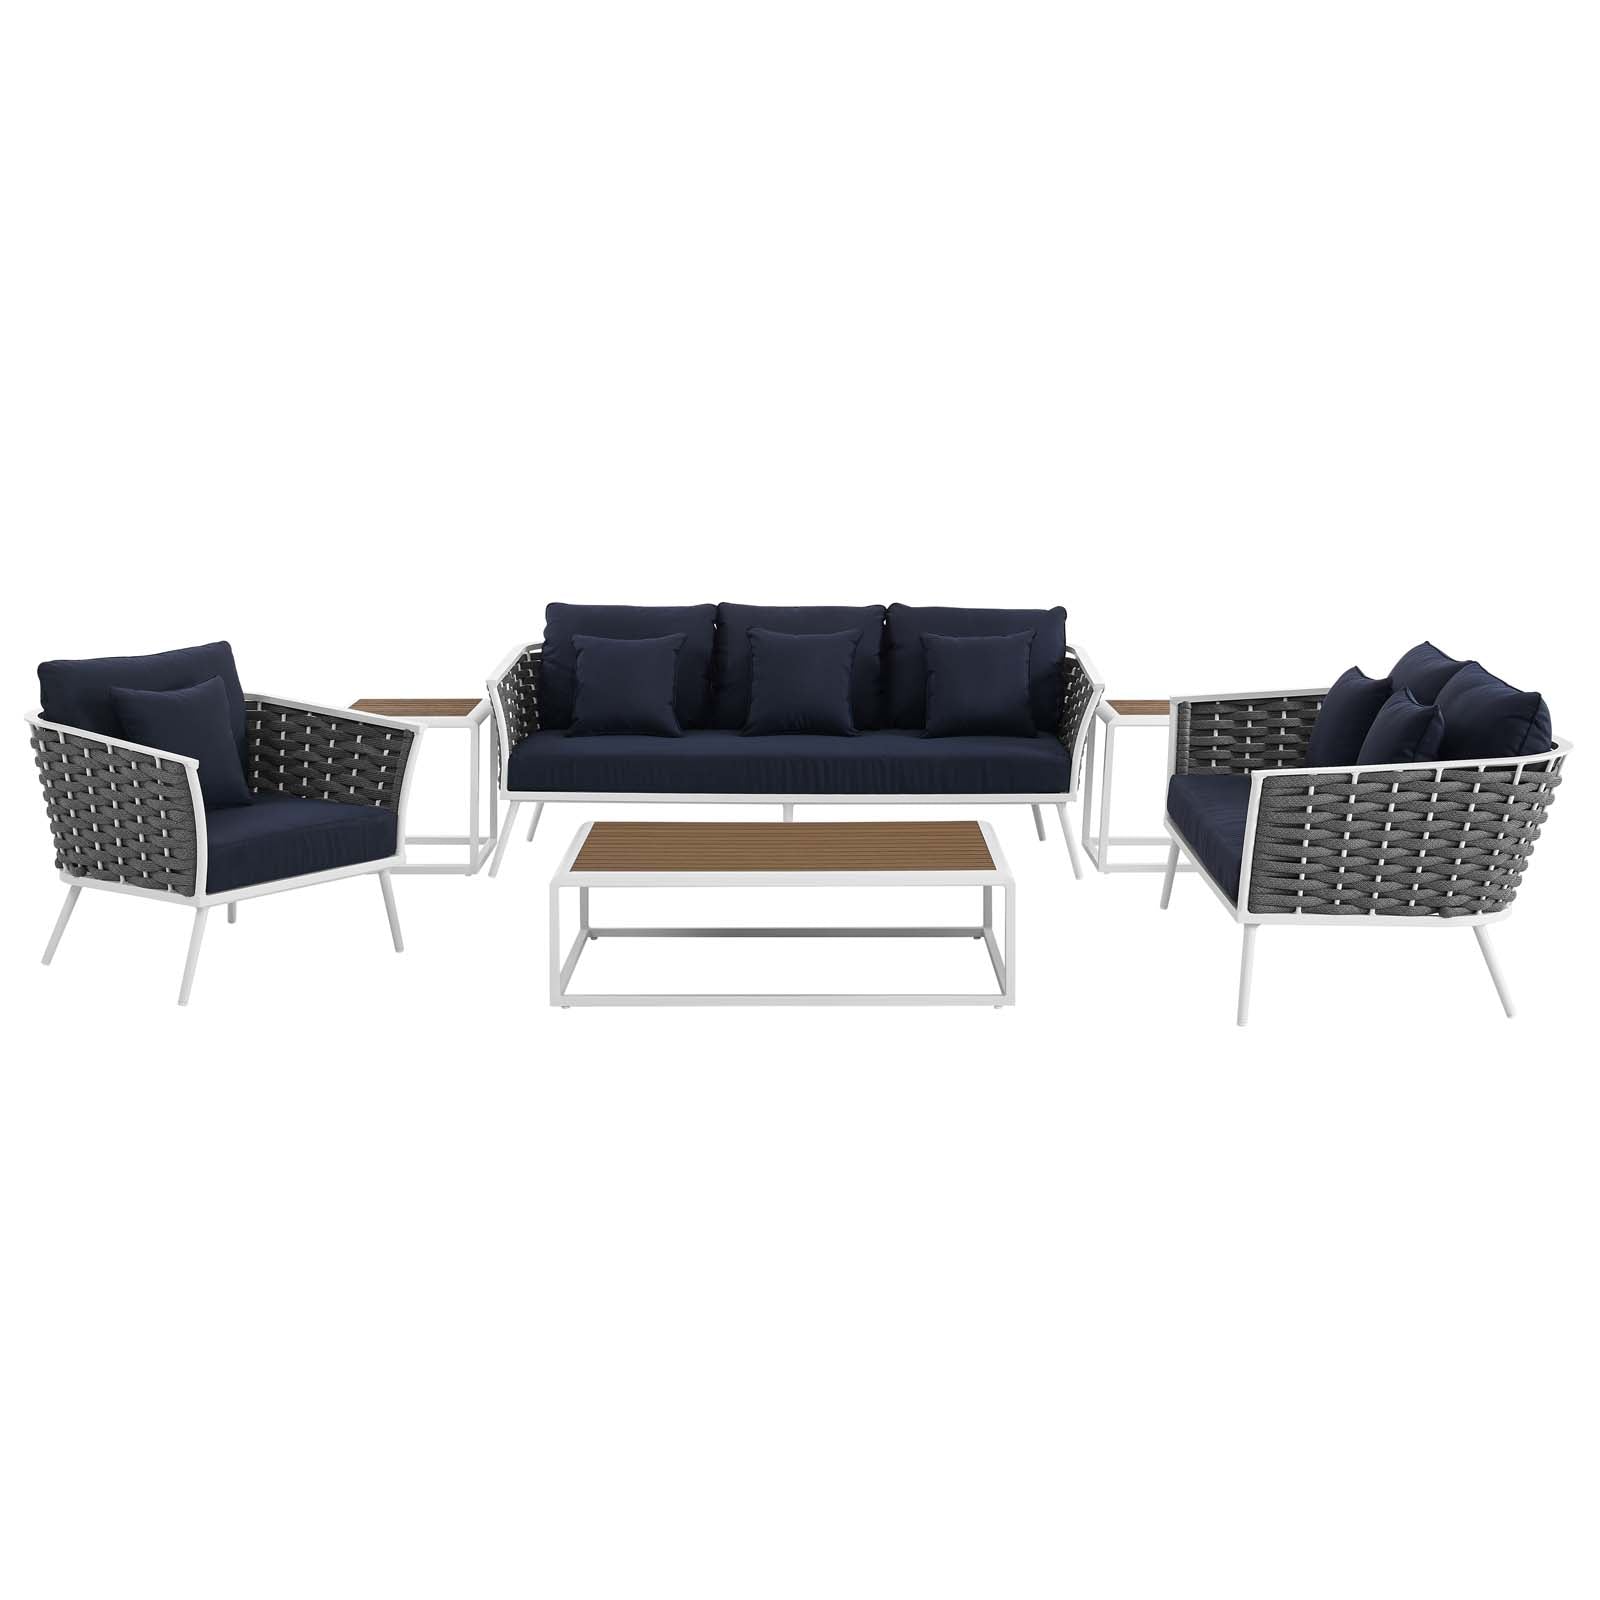 Stance 6 Piece Outdoor 139.5"W & 87 D Patio Sectional Sofa Set White